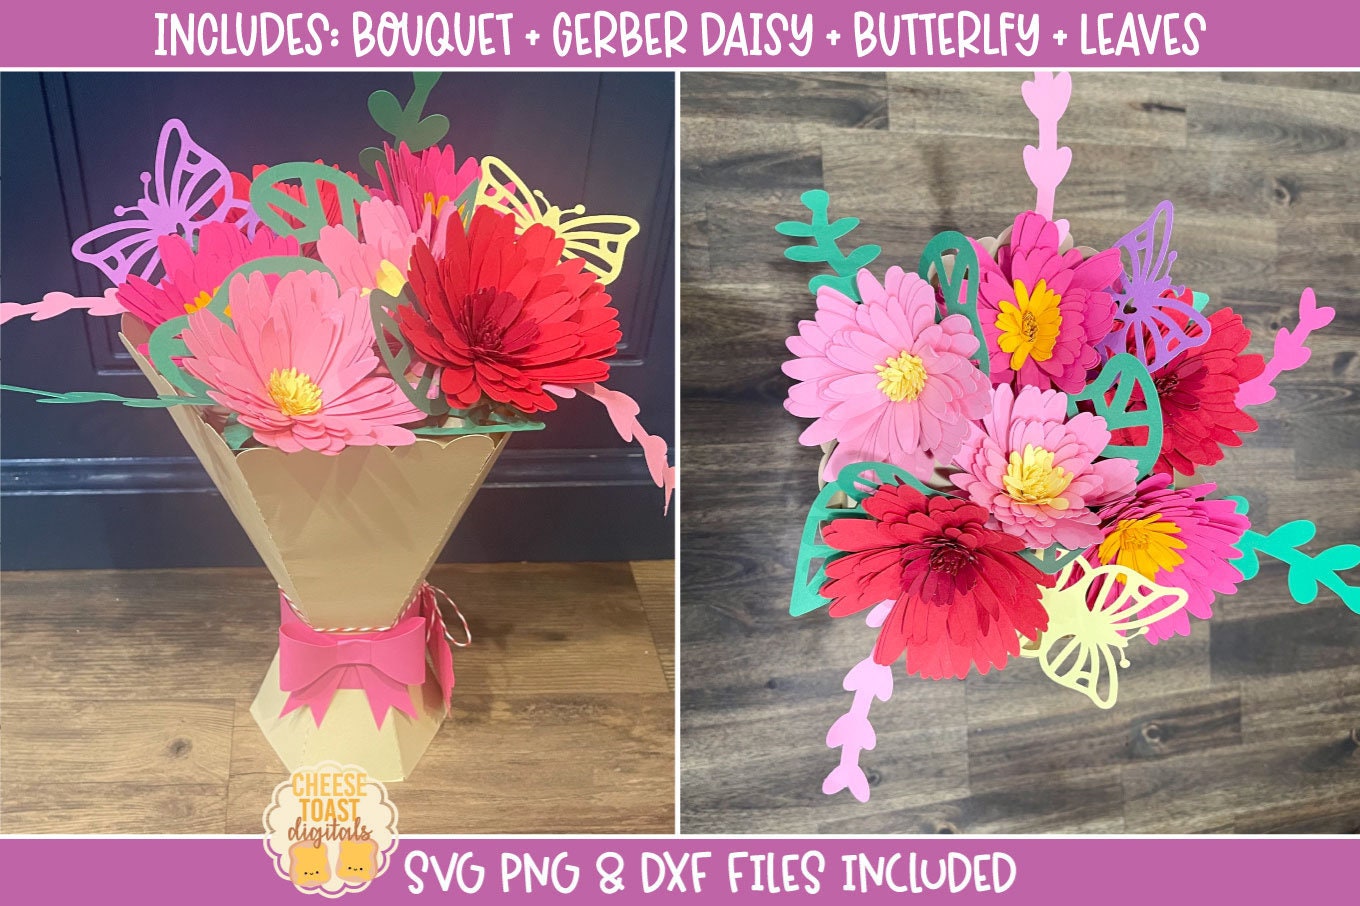 ः𝐬𝐨𝐟𝐭𝐬𝐮𝐧𝐫𝐢𝐬𝐞ः  Wrap flowers in paper, Paper flower decor, How  to wrap flowers